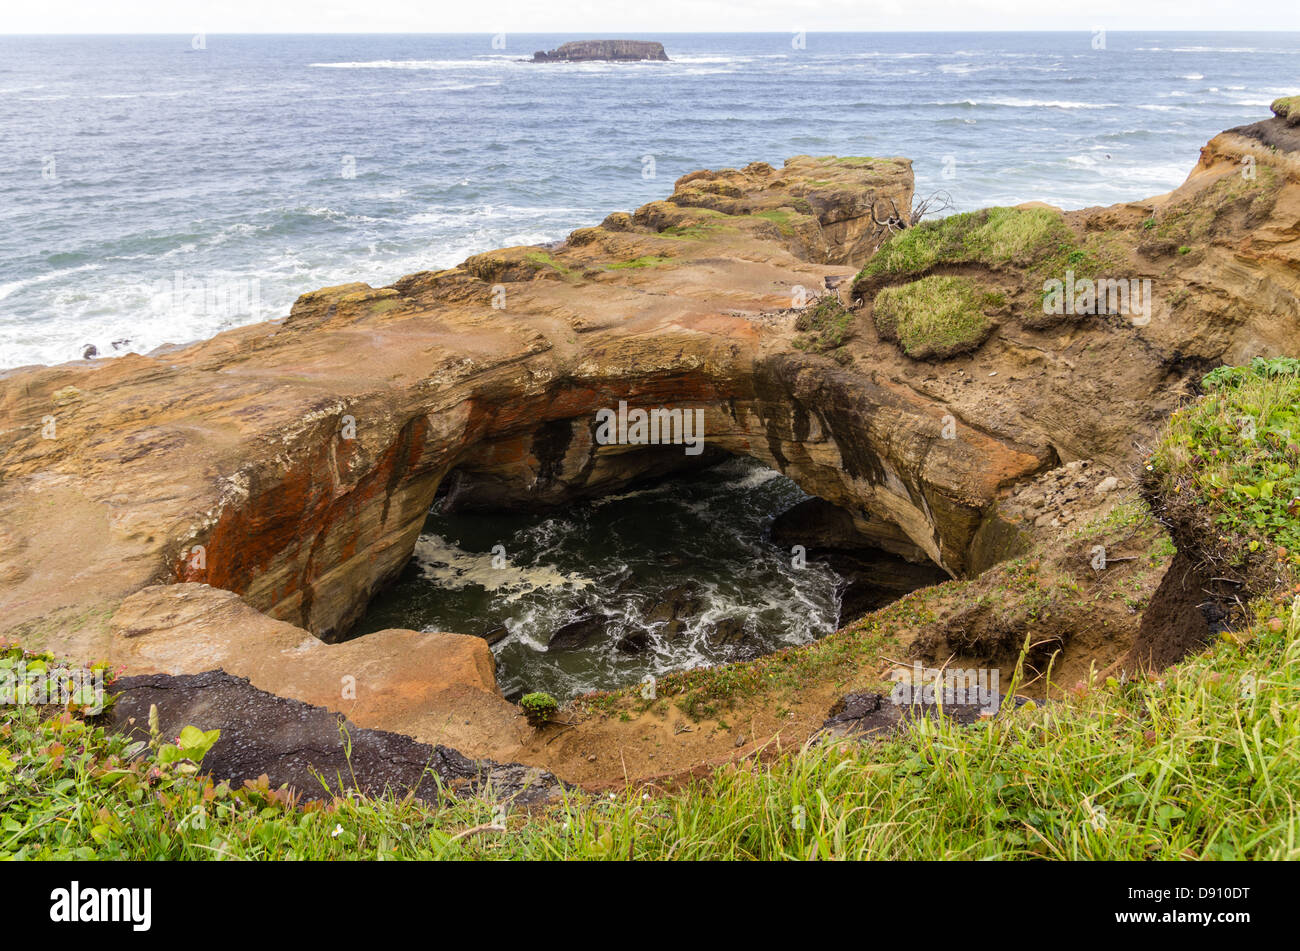 Oregon, Otter Rock, Devils Punch Bowl State Park. Water washes through Devil's Punchbowl rock formation Stock Photo